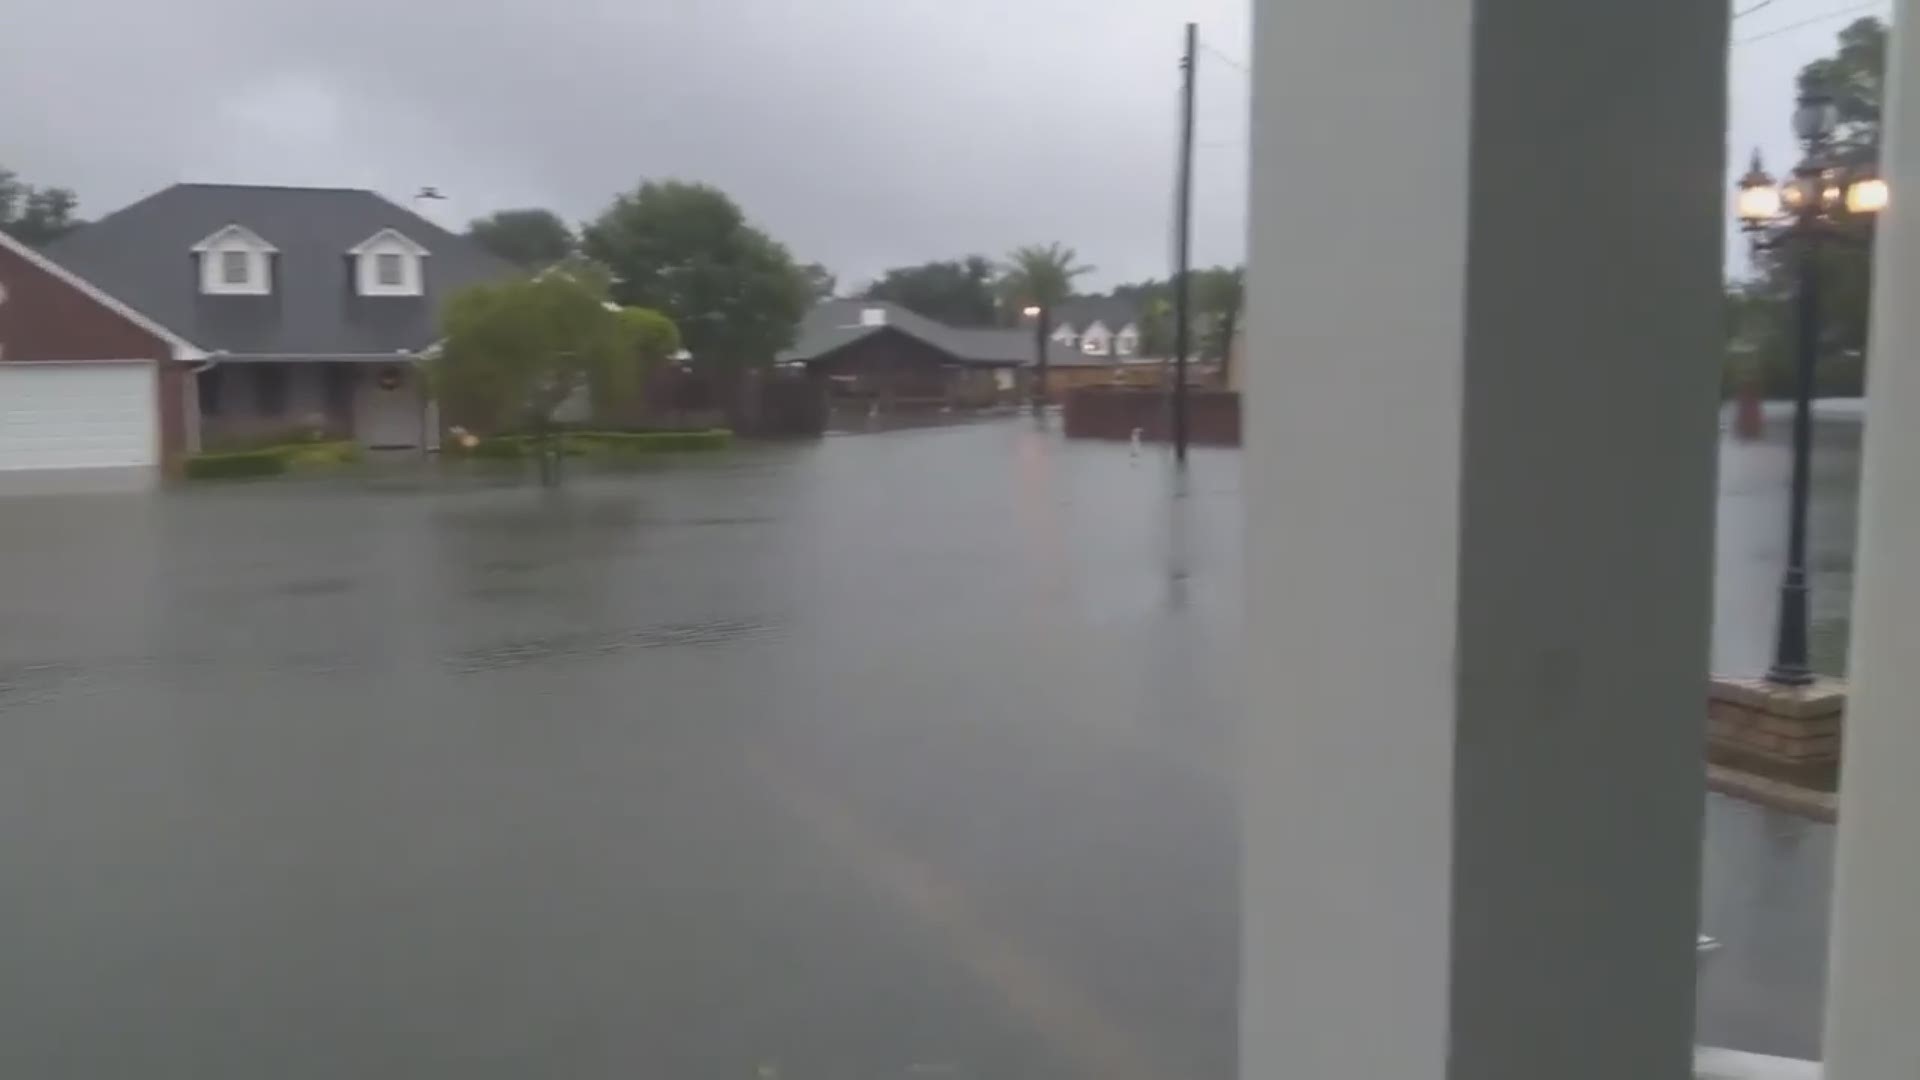 More footage is sent into to the 12NewsNow team as flooding ravages Beaumont, Texas on Sept. 19.